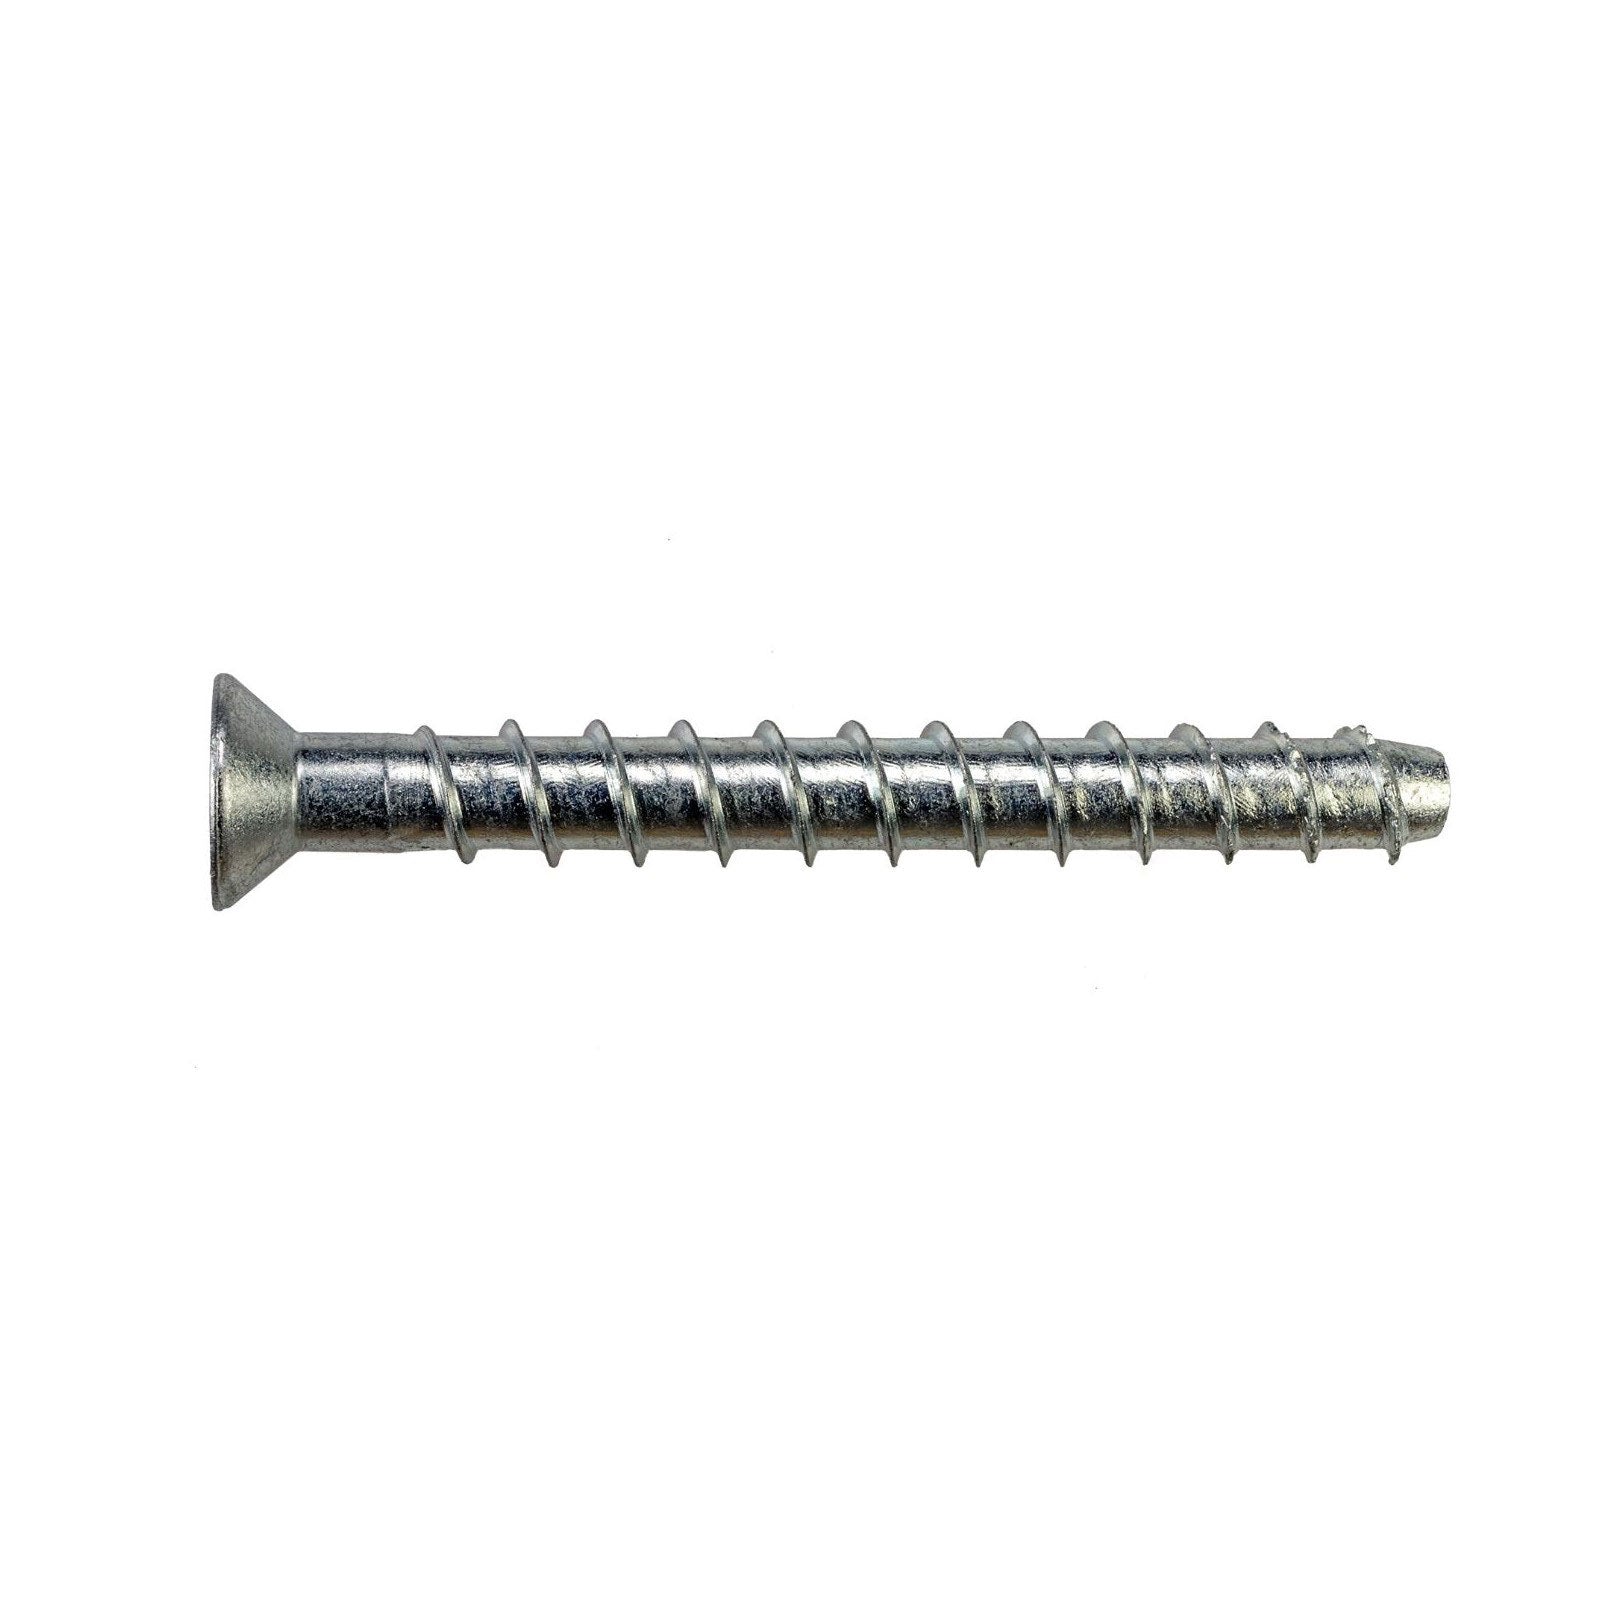 1/4" x 3" Strong-Tie Countersunk Titen HD Anchor - 316 Stainless